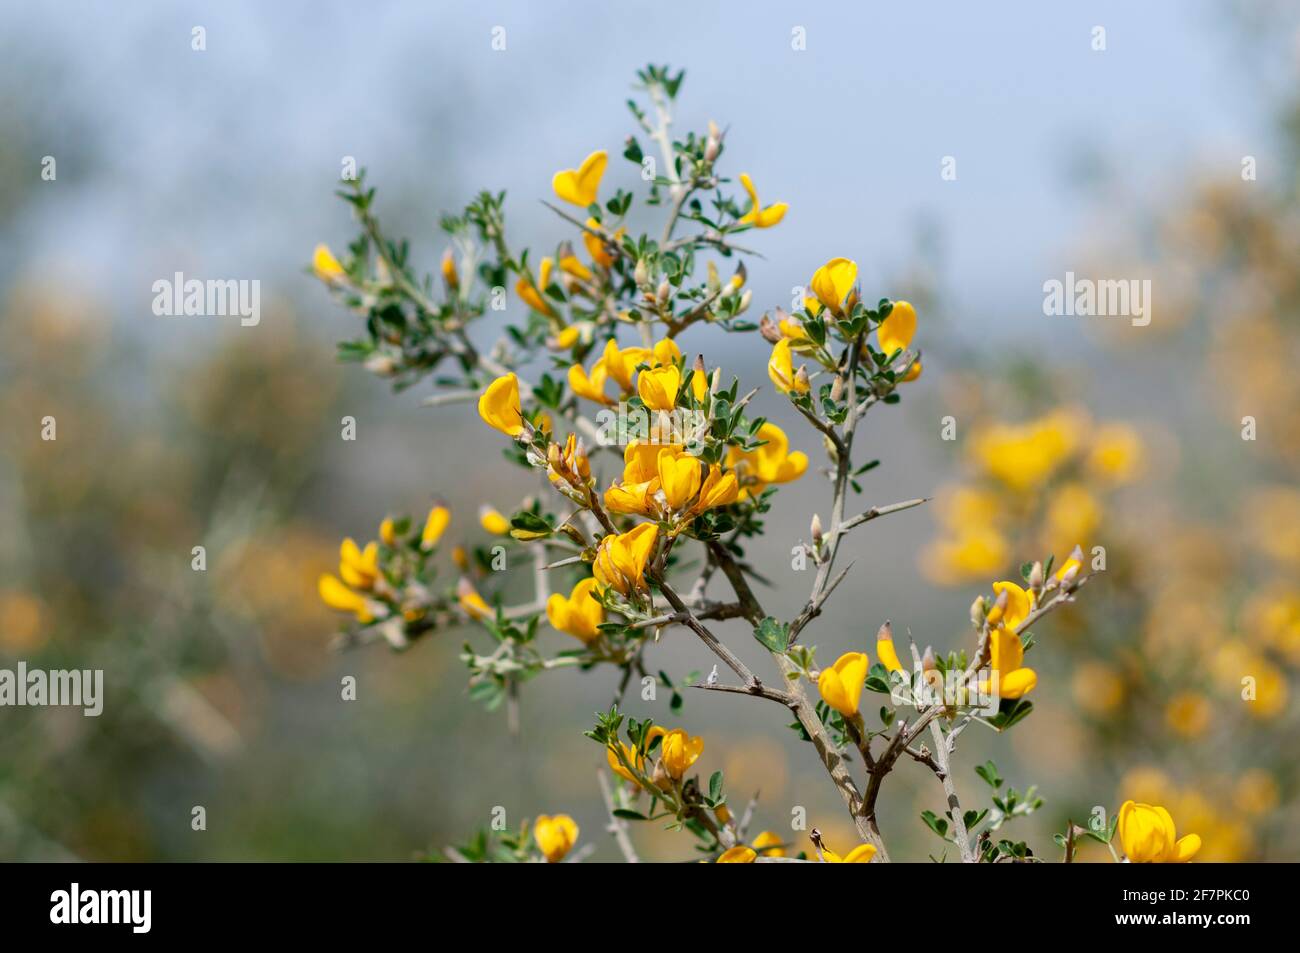 Calicotome villosa, also known as hairy thorny broom and spiny broom, is a small shrubby tree native to the eastern Mediterranean region. Photographed Stock Photo